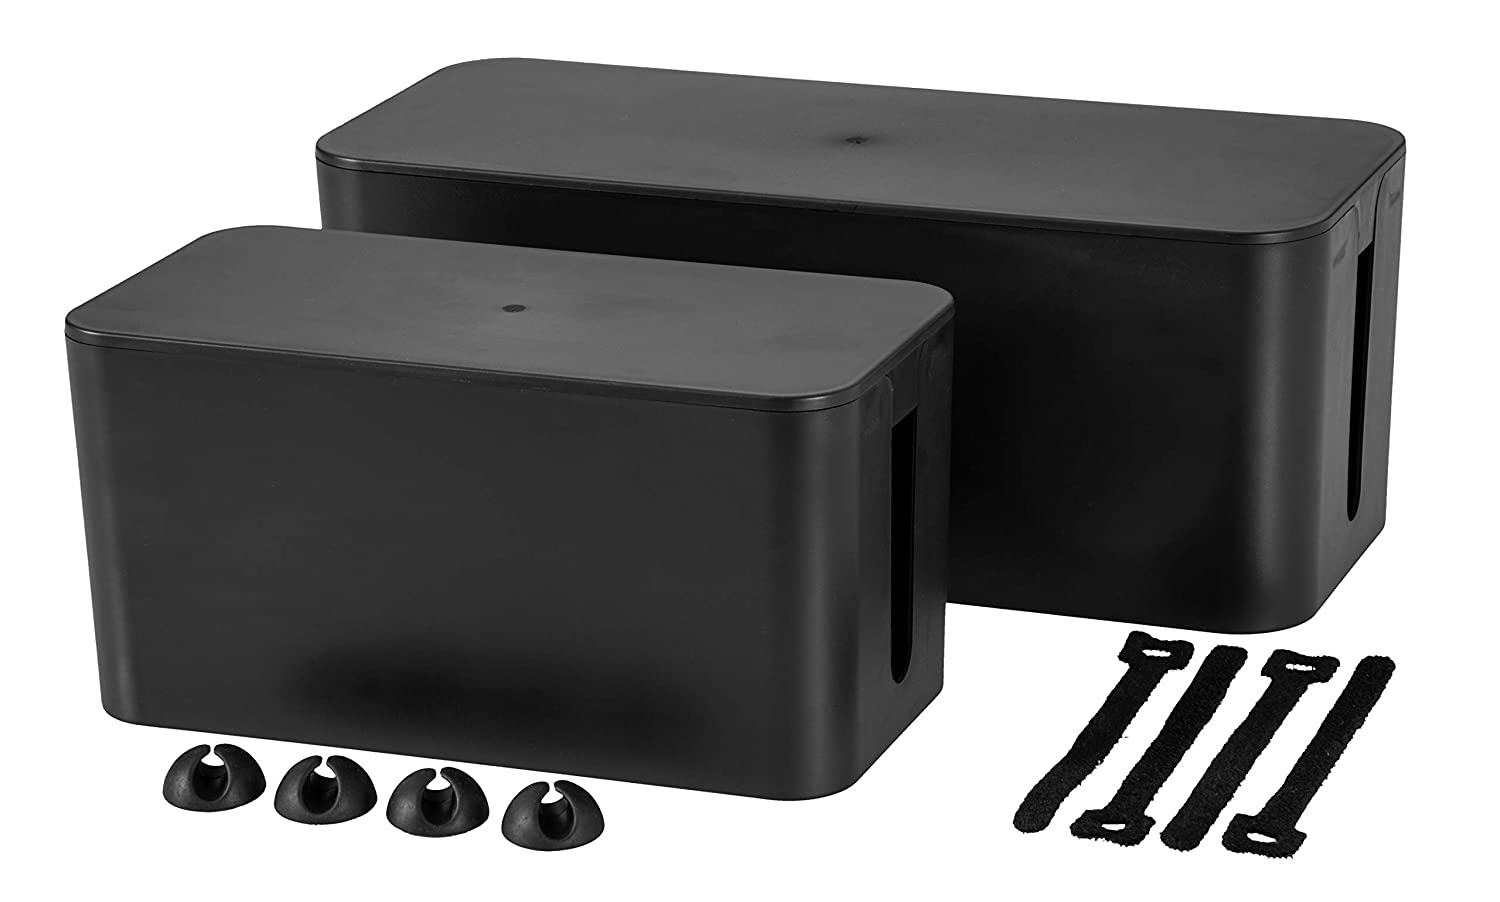 Cable Management Box - Hide Cords Home Organizer Tool, Power Strip Cover, Baby Proof & Pets Electric Concealer - Wire Cord Outlet Surge Protector Covers for Lounge, Desk, TV & Computer - 2 Set, Black